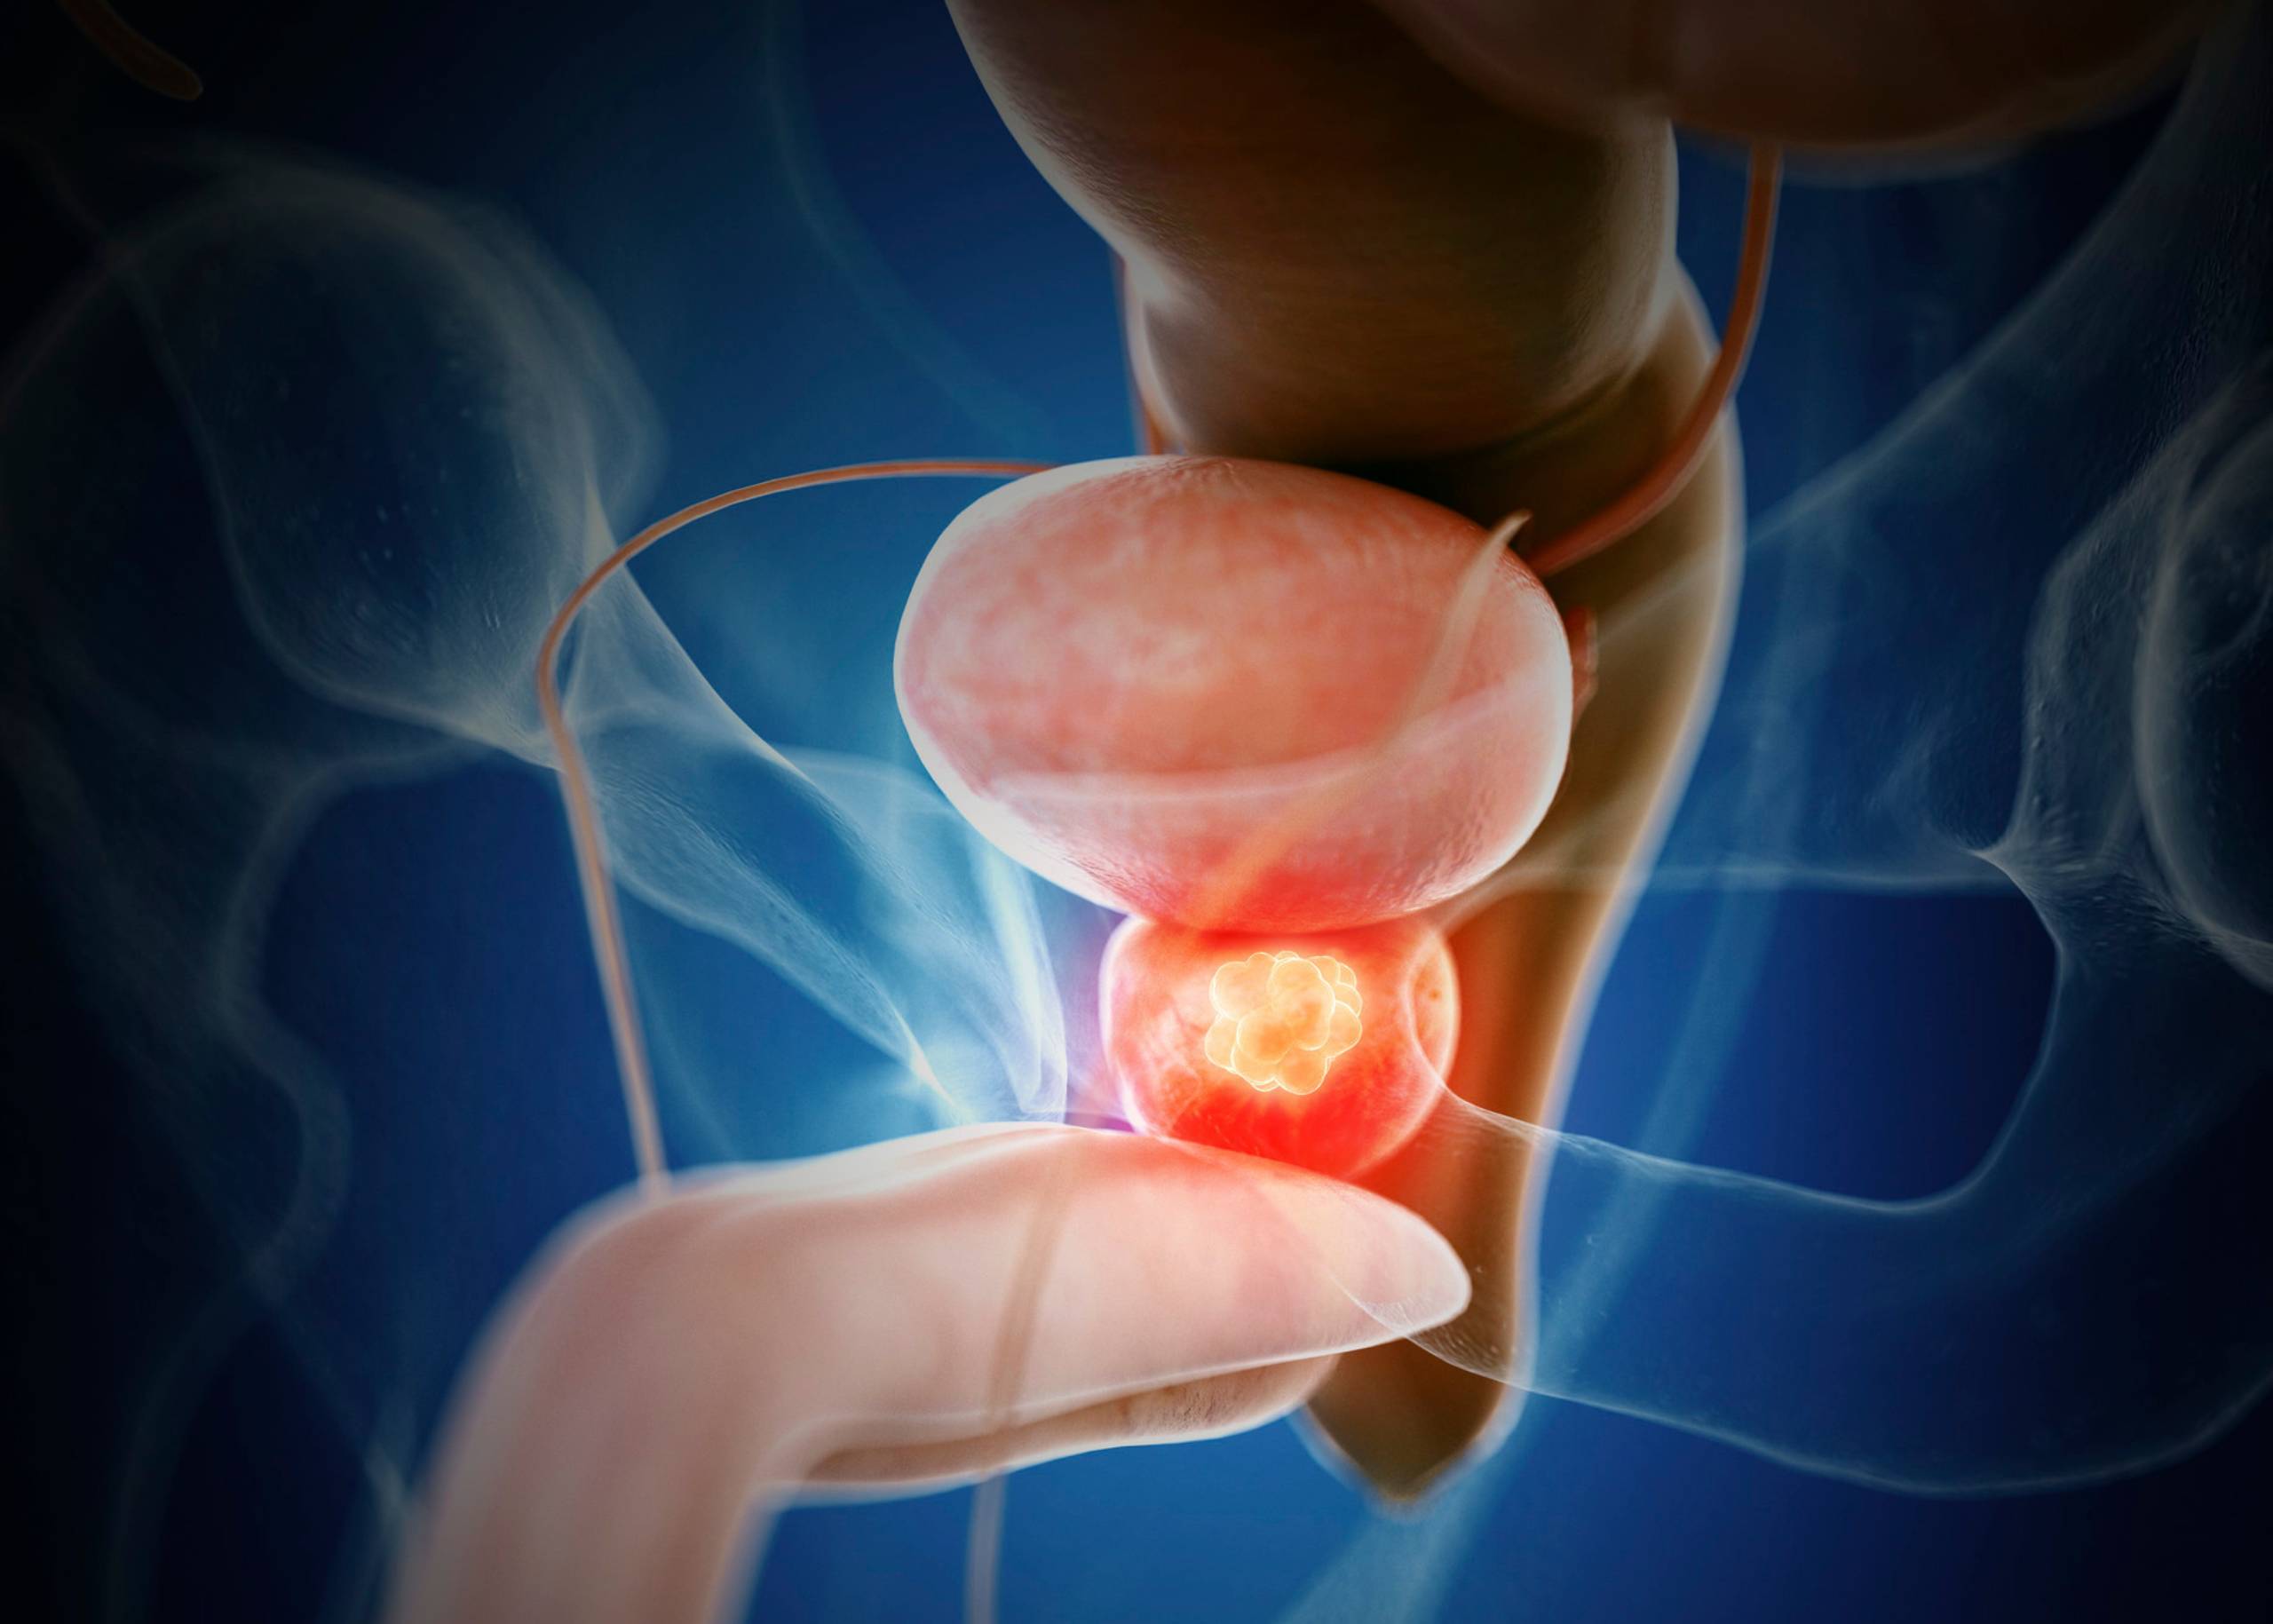 Prostate Cancer – Symptoms, Causes & Treatment